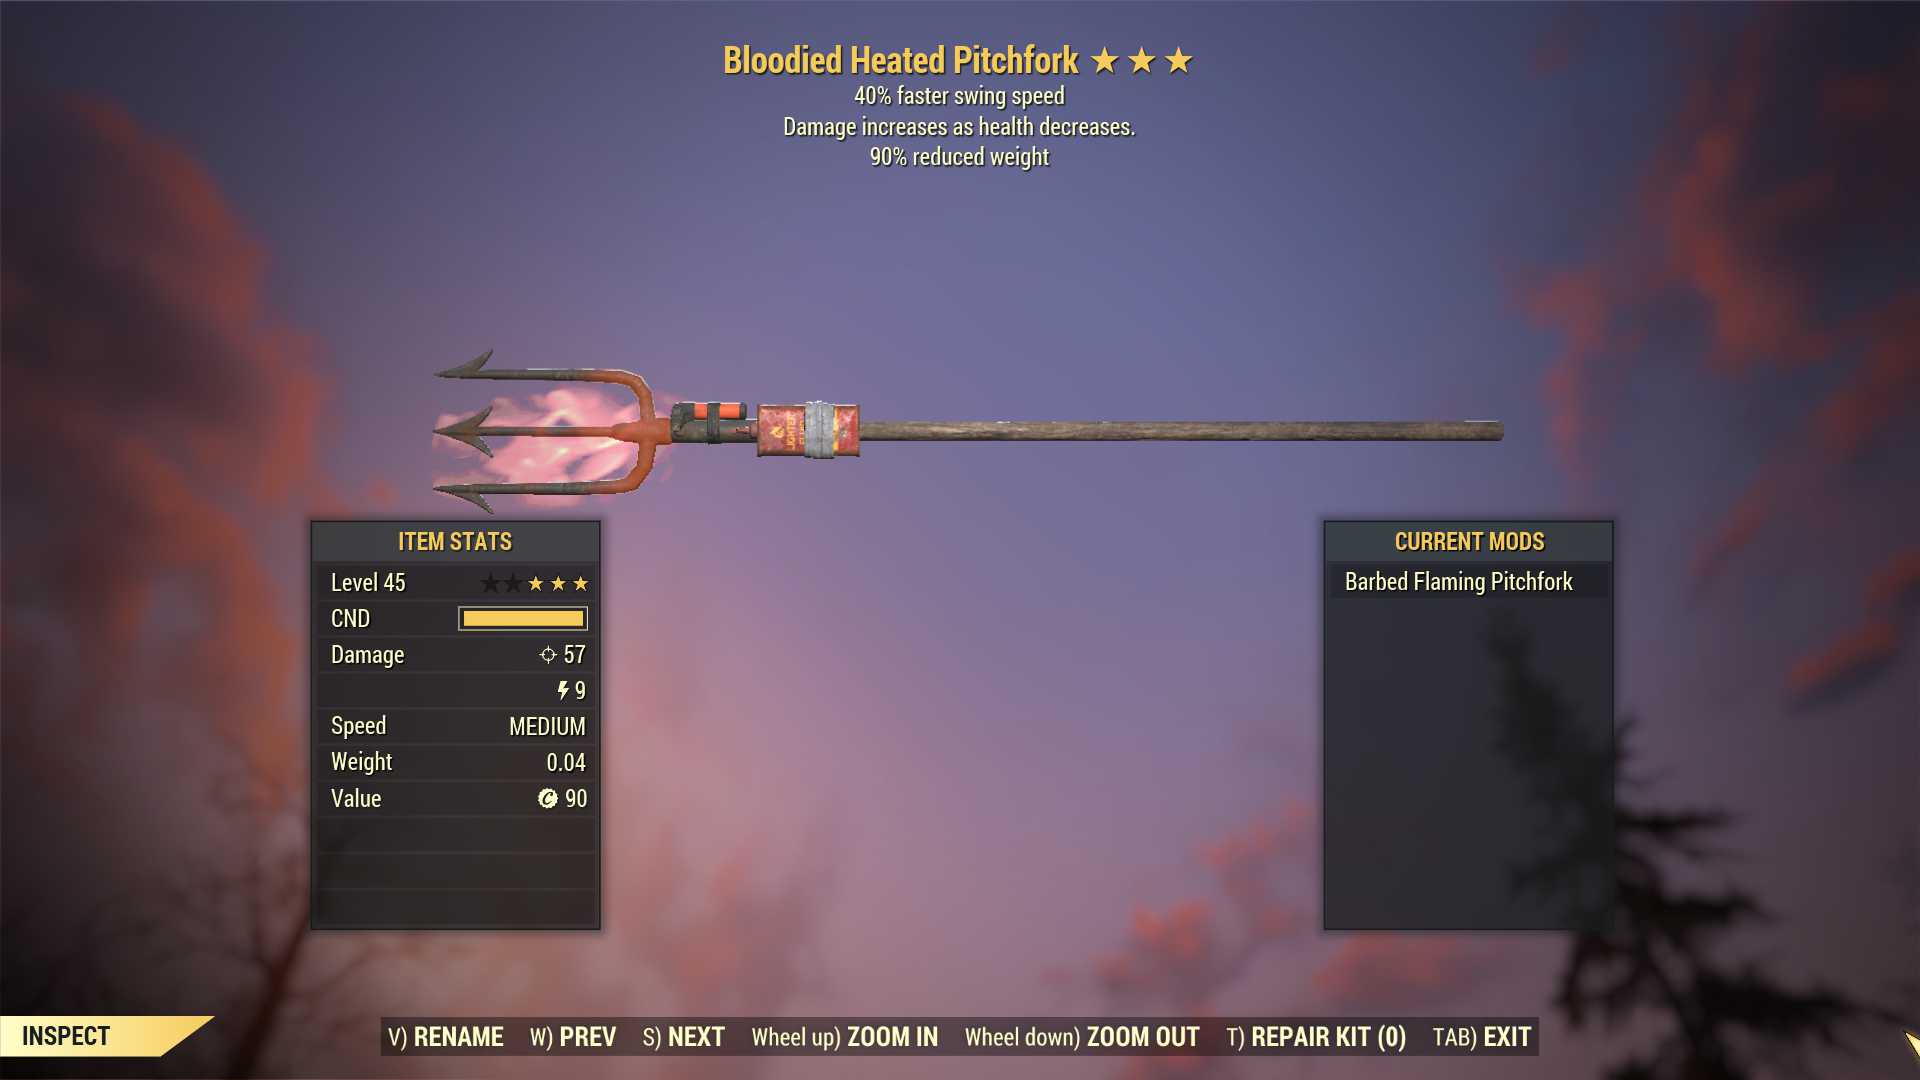 Bloodied Pitchfork (40% Faster Swing Speed, 90% reduced weight)